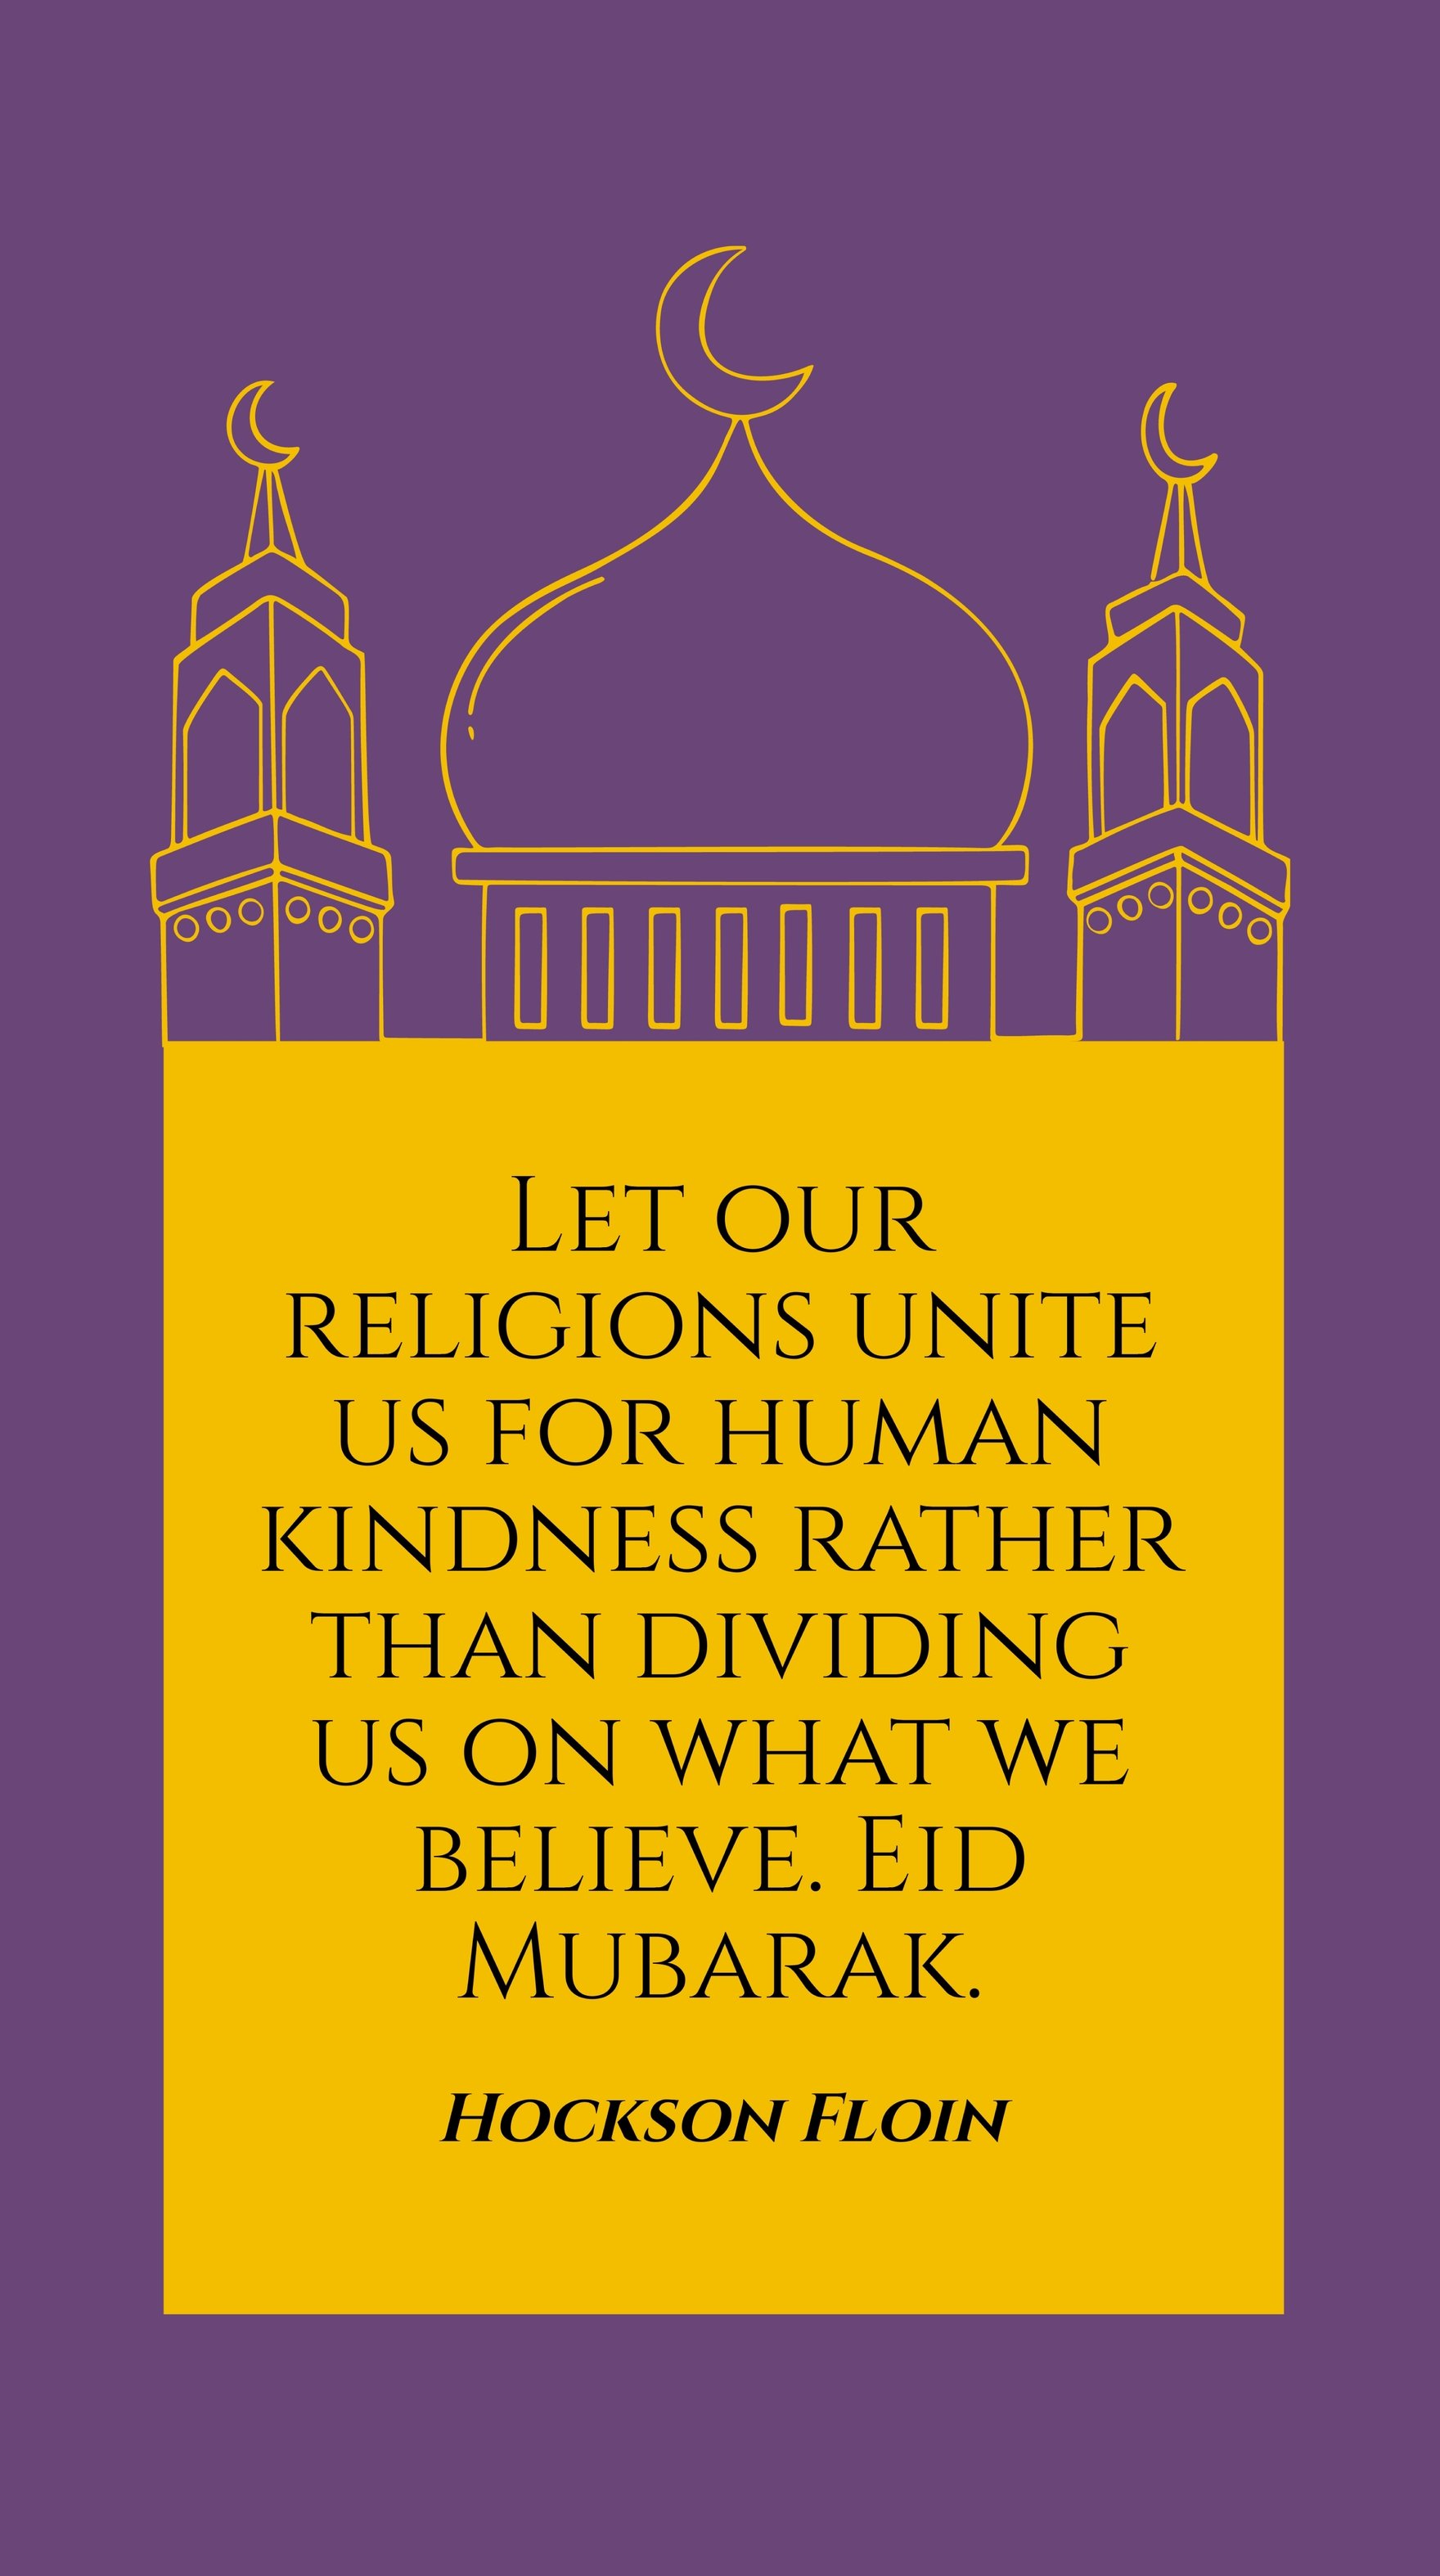 Free Hockson Floin - Let our religions unite us for human kindness rather than dividing us on what we believe. Eid Mubarak. in JPG